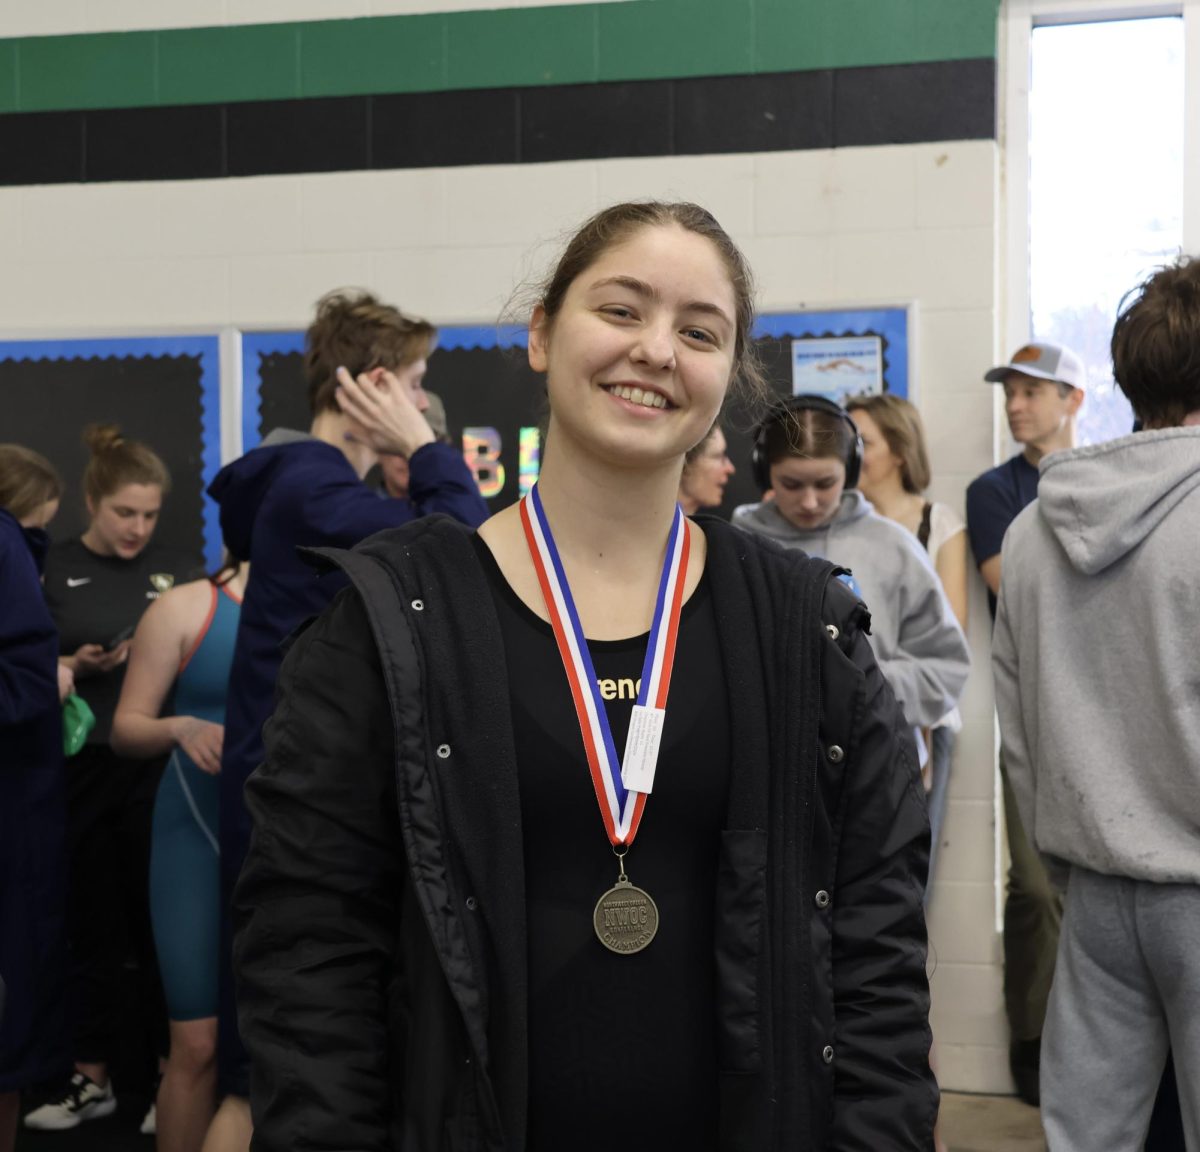 Junior Kayla Chapman stands tall with a medal labeled “Northwest Oregon Conference Champion” after breaking the record for La Salle, not once, but twice.